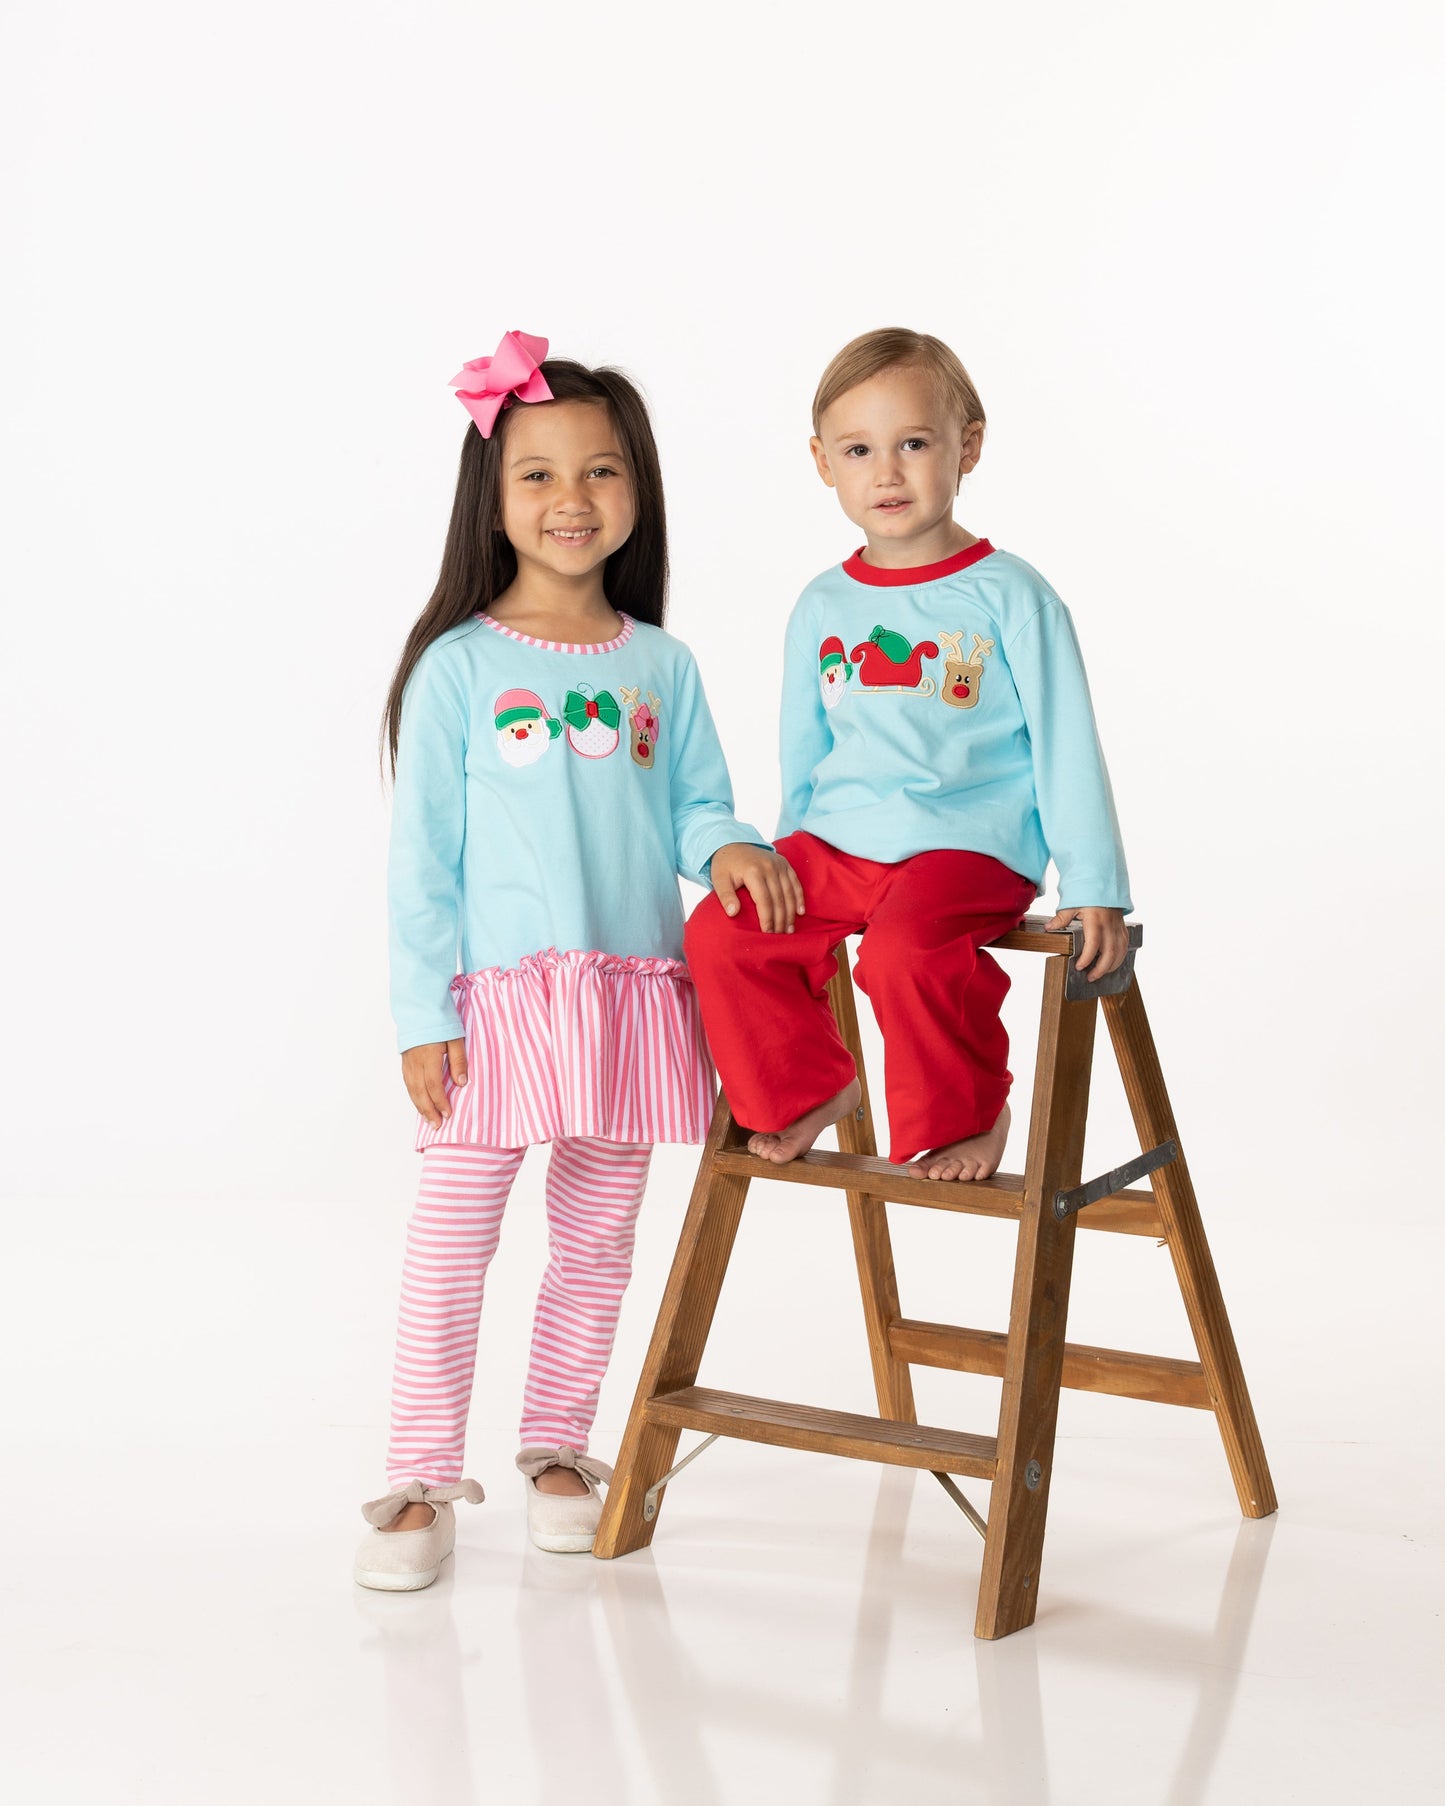 Harrison Holiday Trio Long Sleeve Shirt Jellybean by Smock Candy